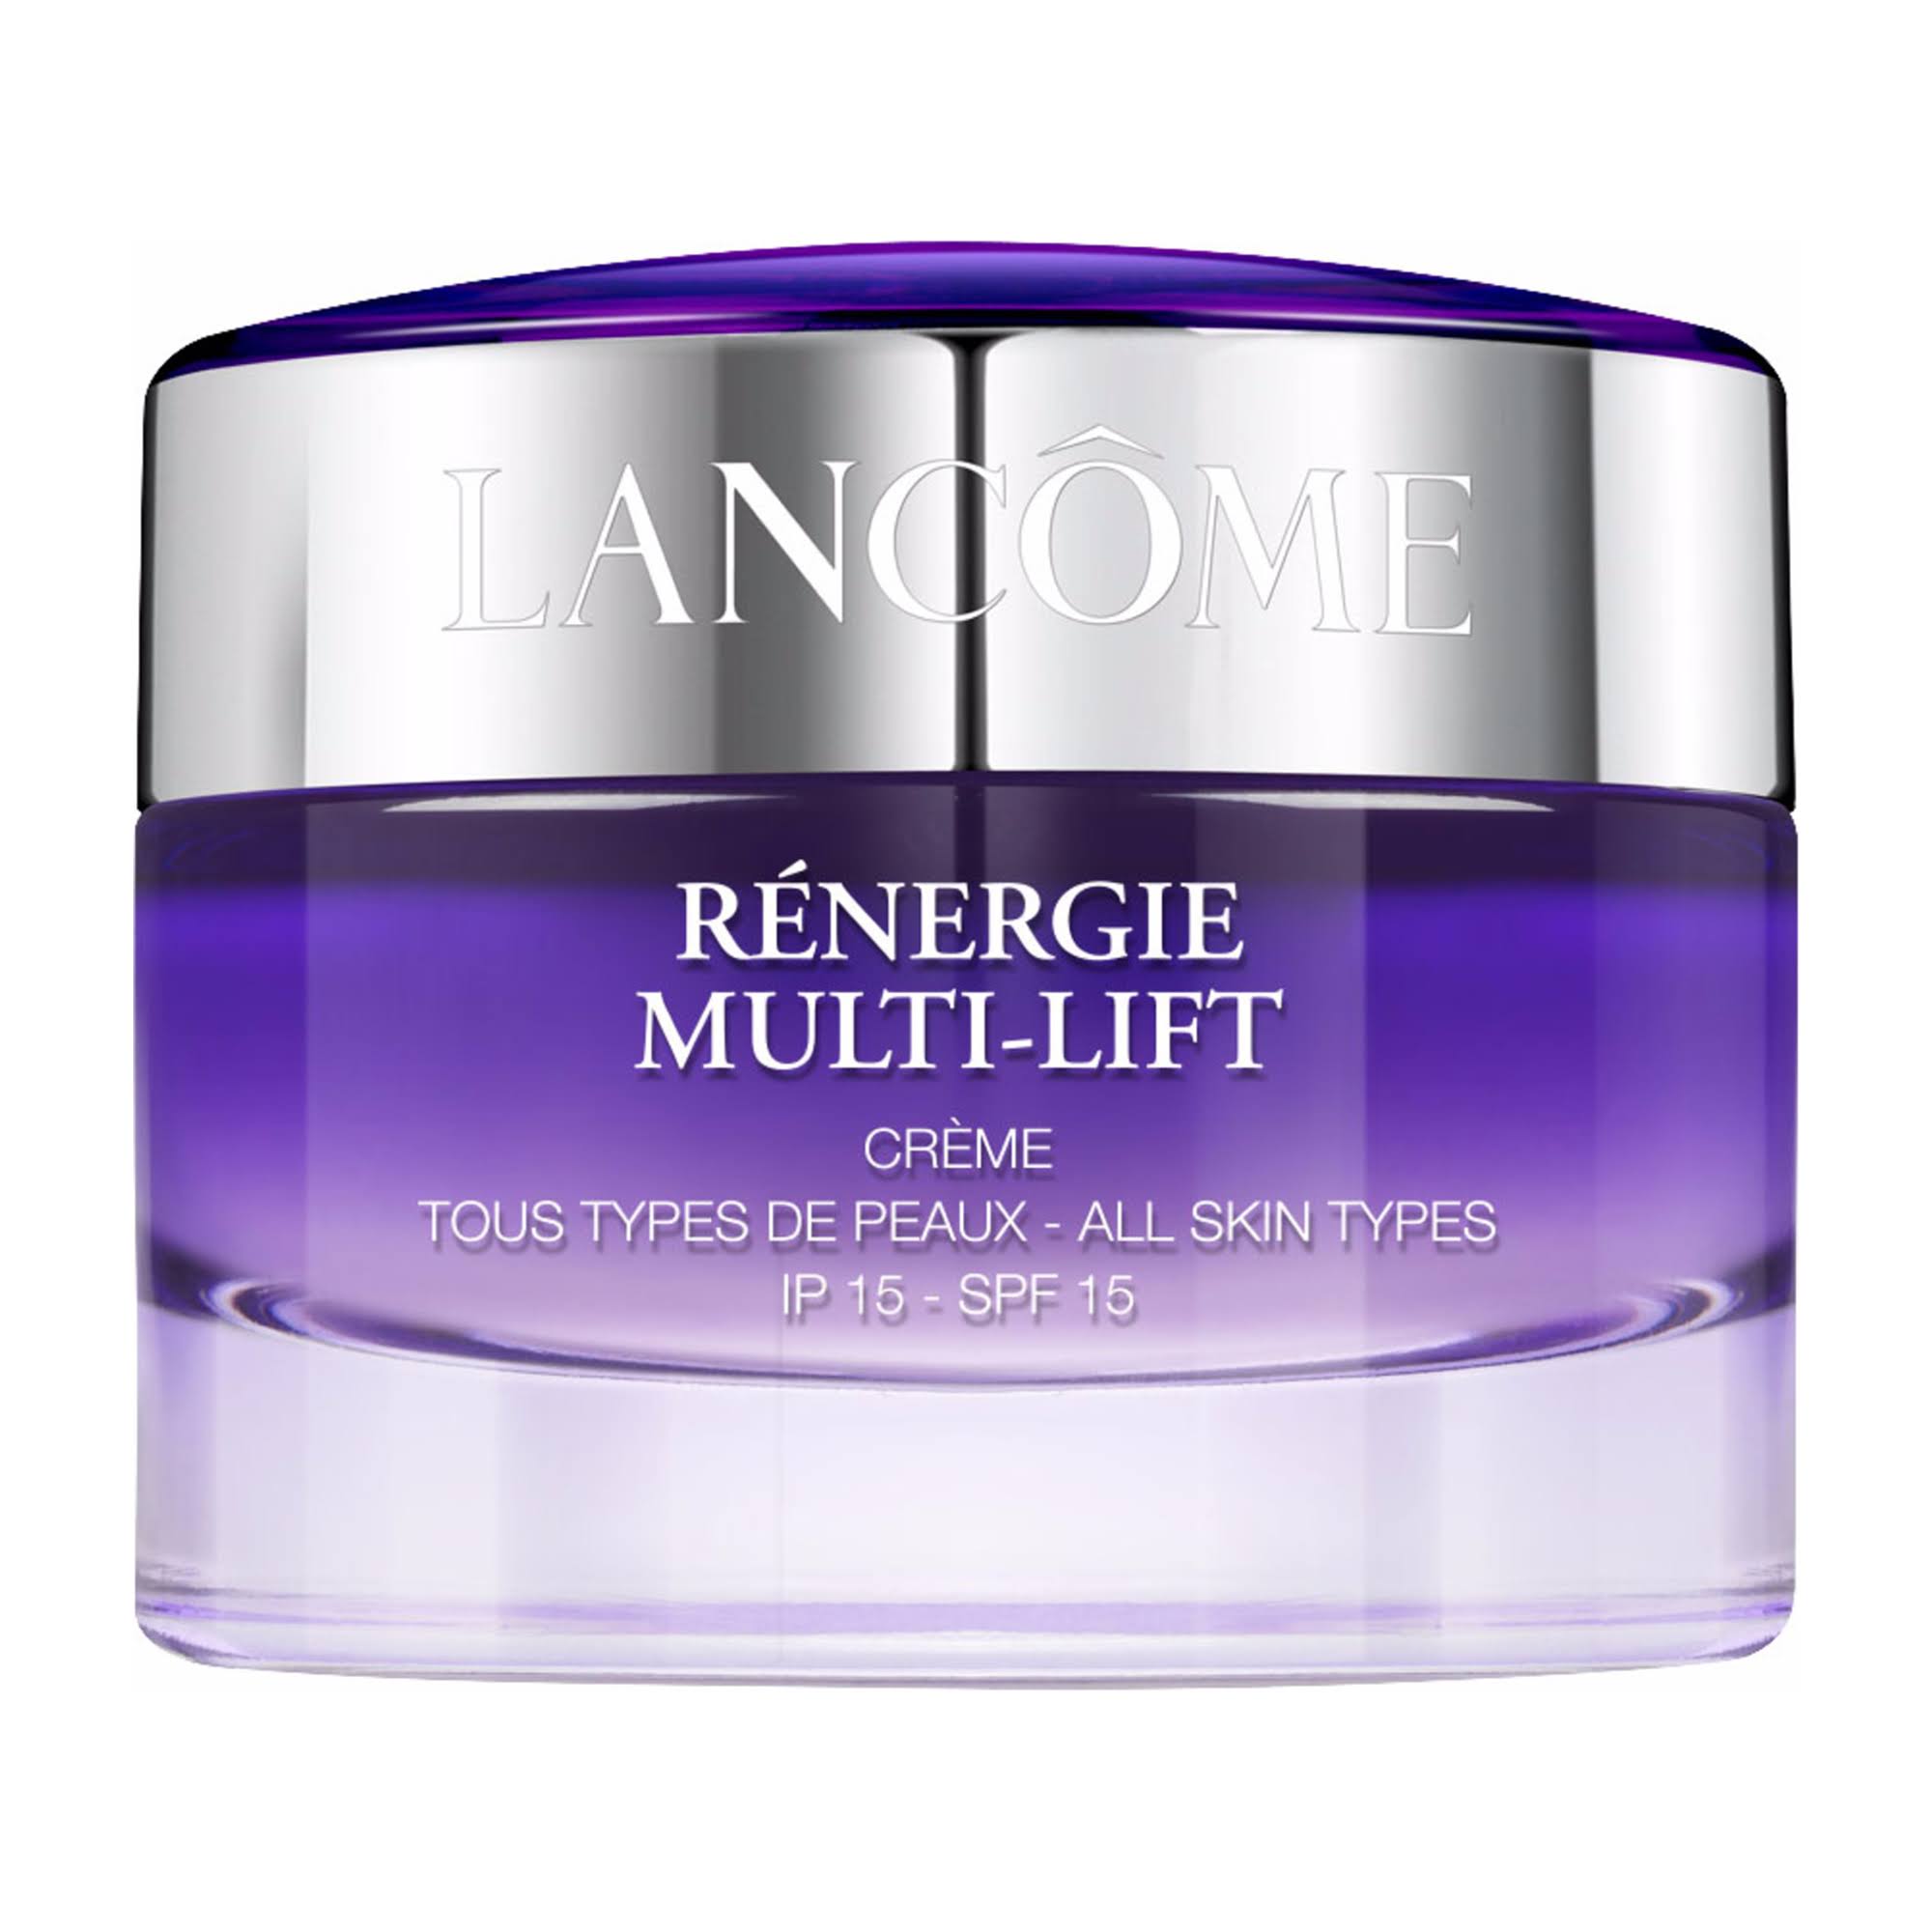 Lancome Renergie Multi-Lift Redefining Lifting Cream For All Skin Types SPF15 50ml